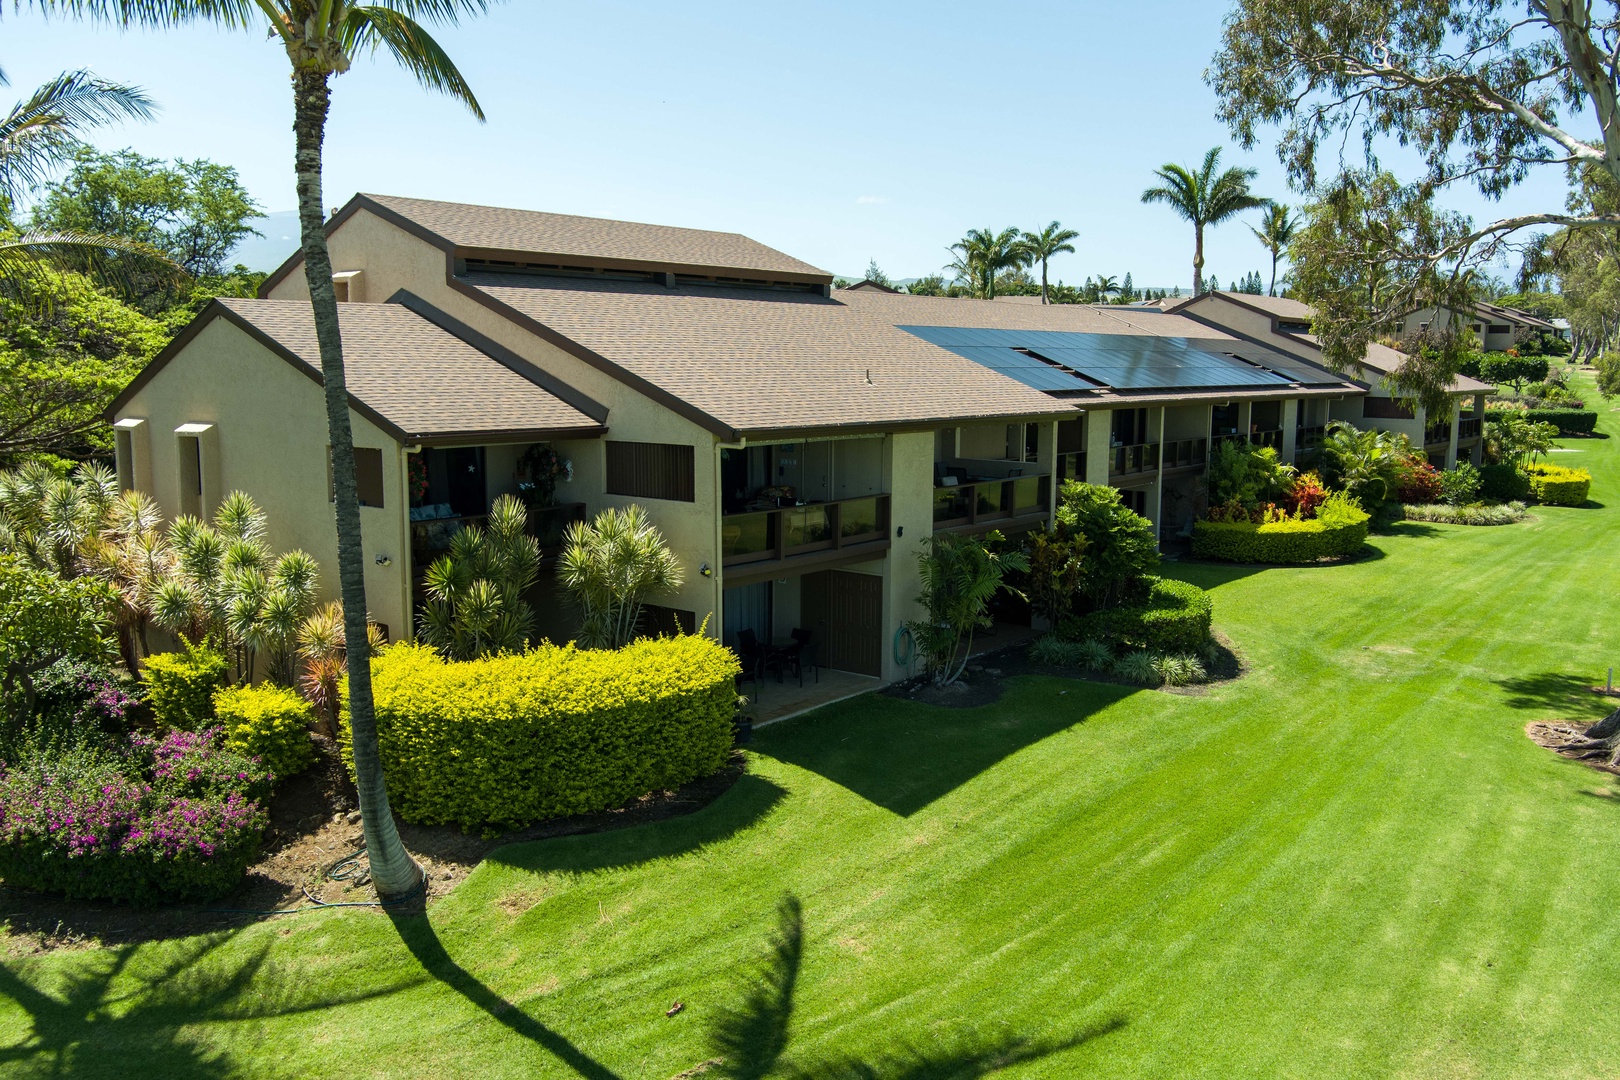 Waikoloa Vacation Rentals, Waikoloa Villas A107 - Beautiful Greenery and Two Terraces Offer Peace and Tranquility